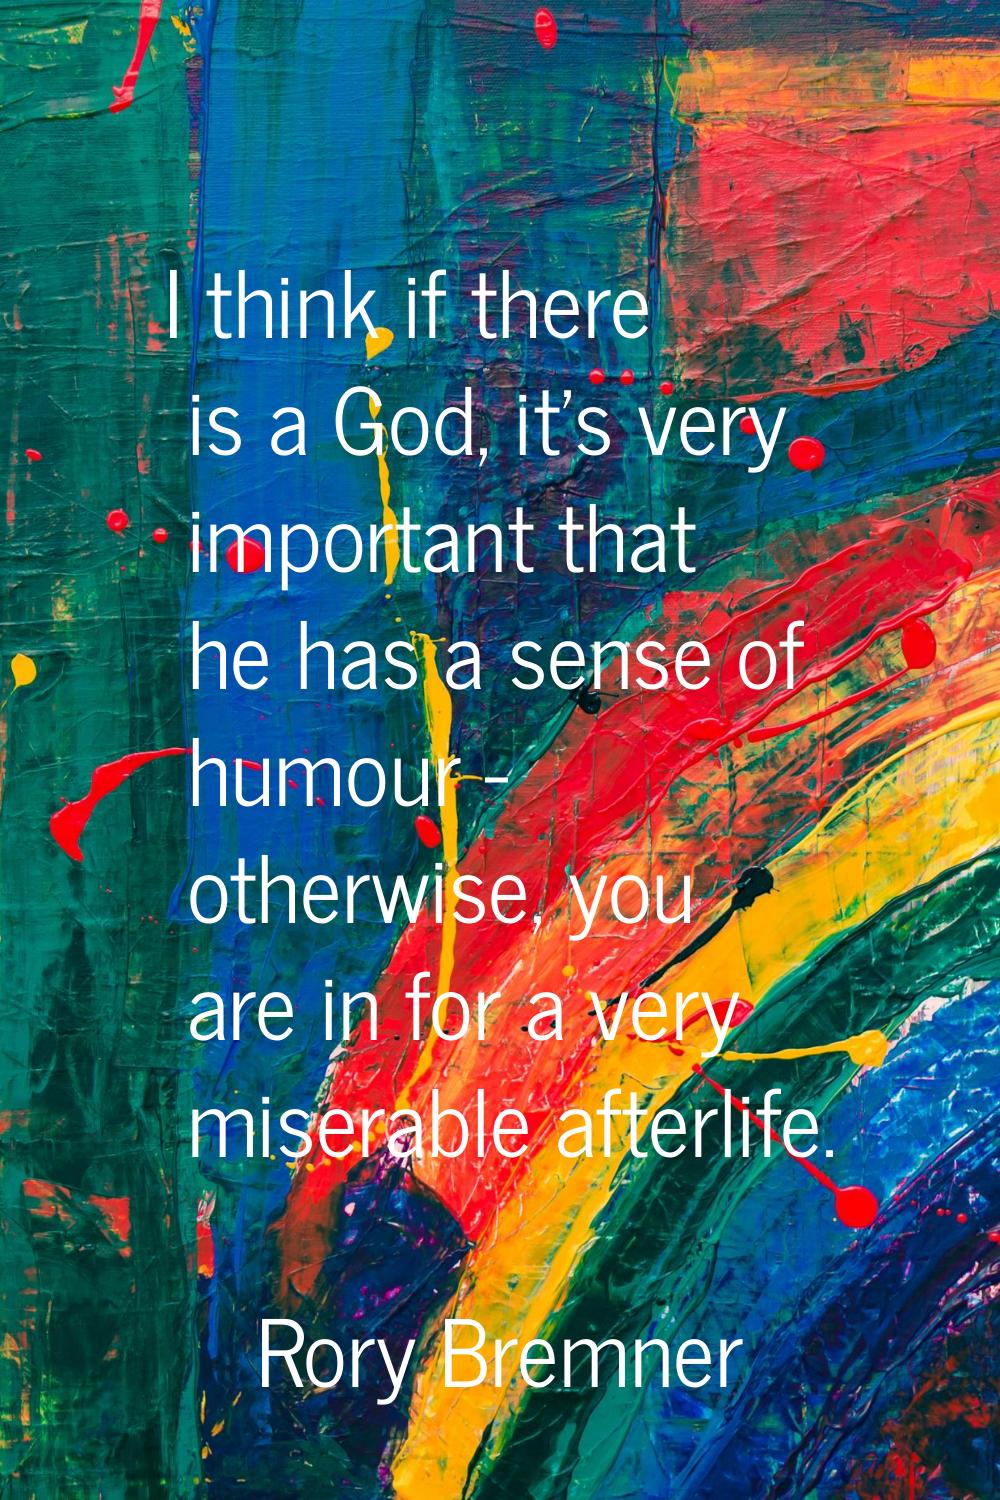 I think if there is a God, it's very important that he has a sense of humour - otherwise, you are i